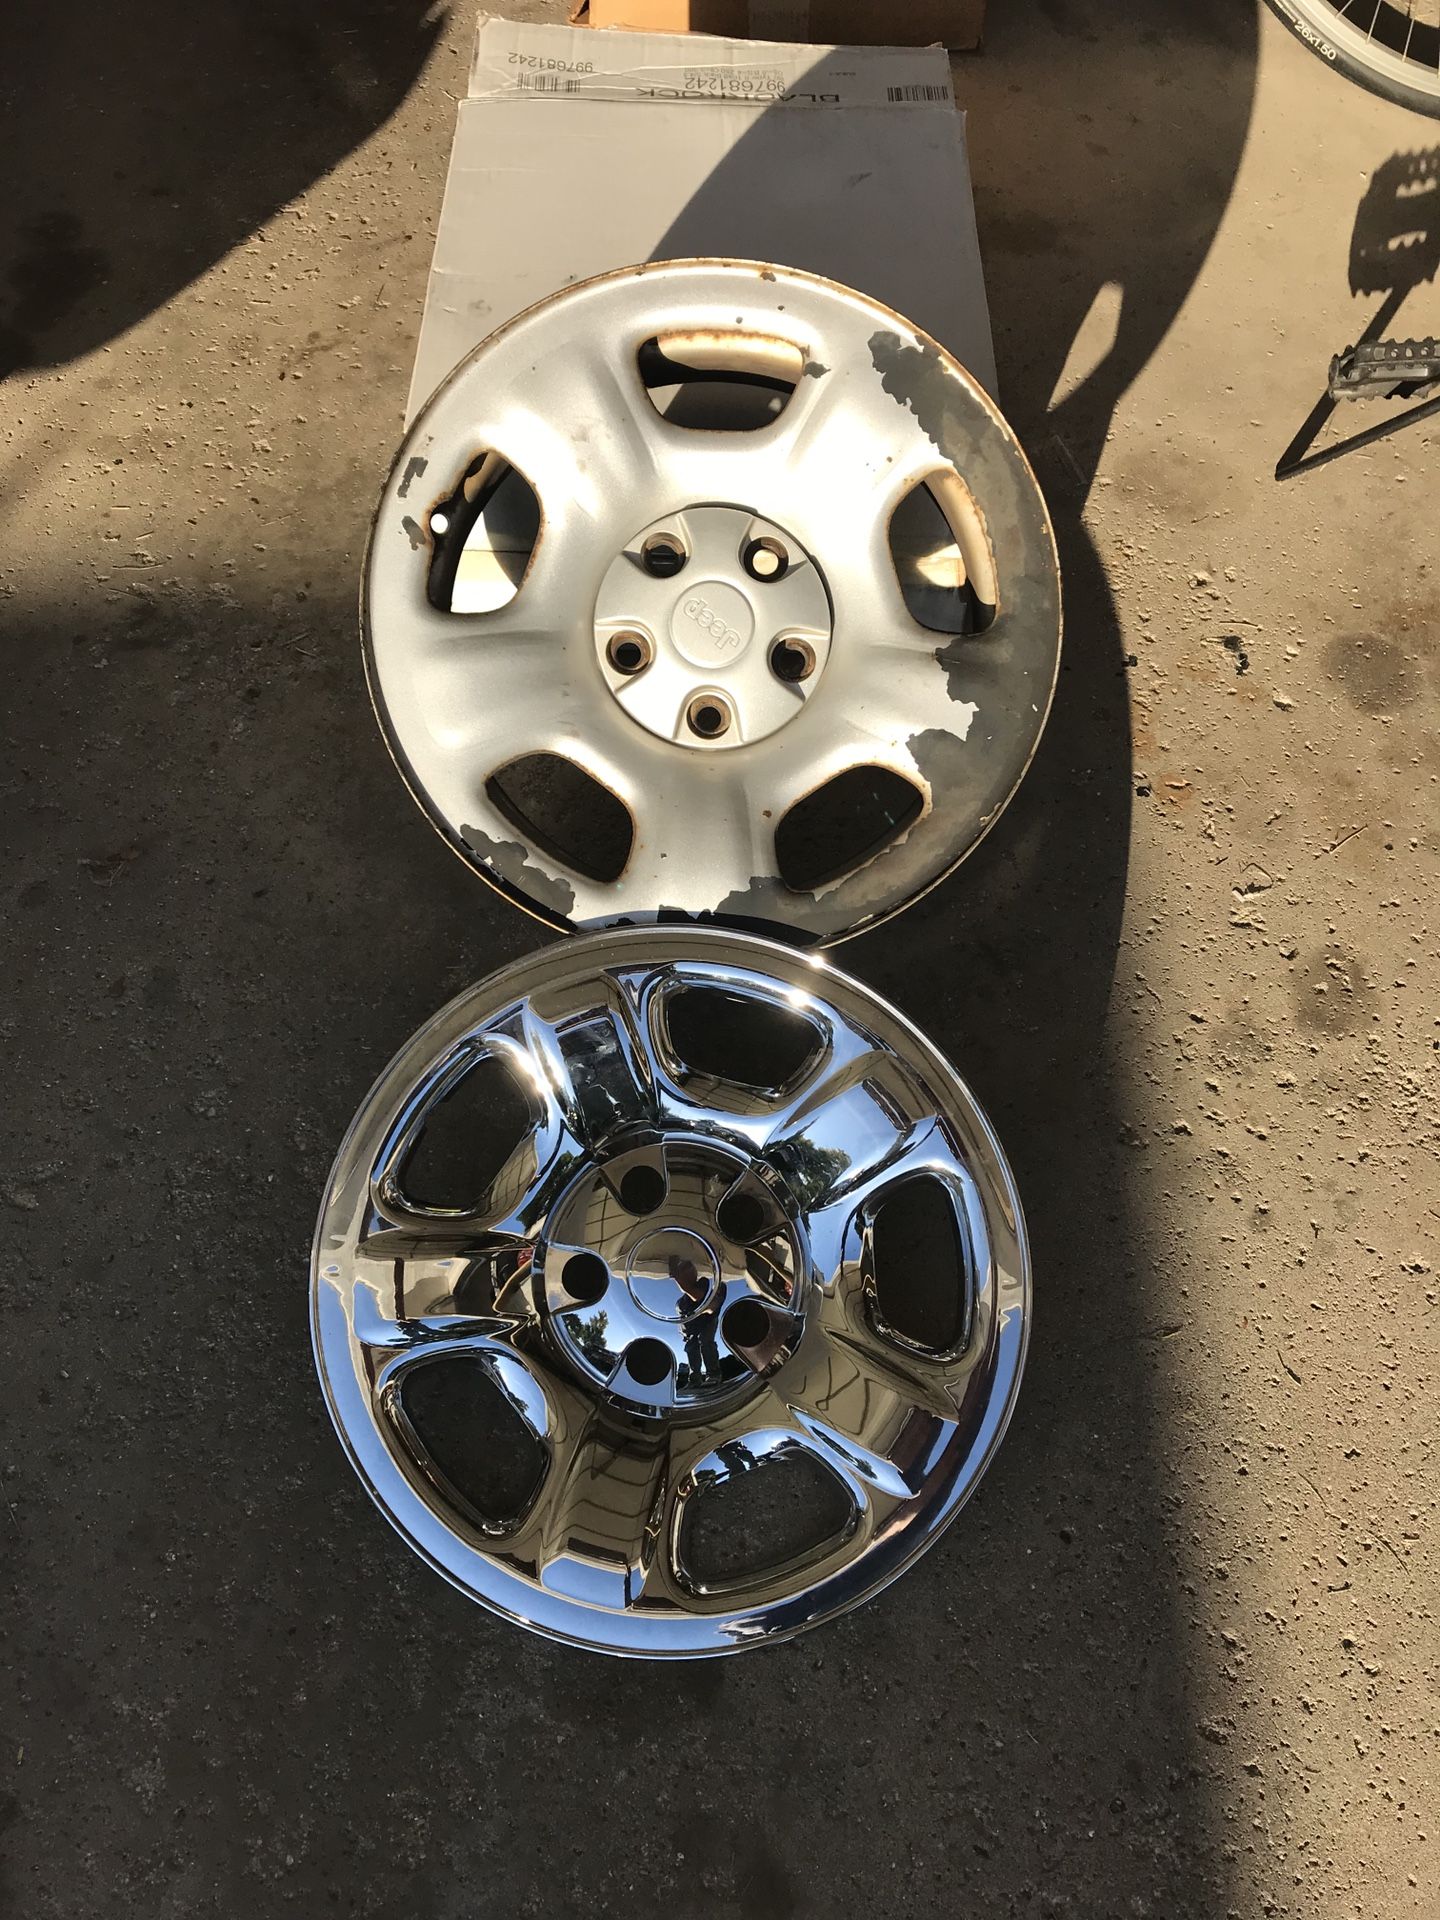 2004 Jeep Liberty wheels and caps (set of 4)